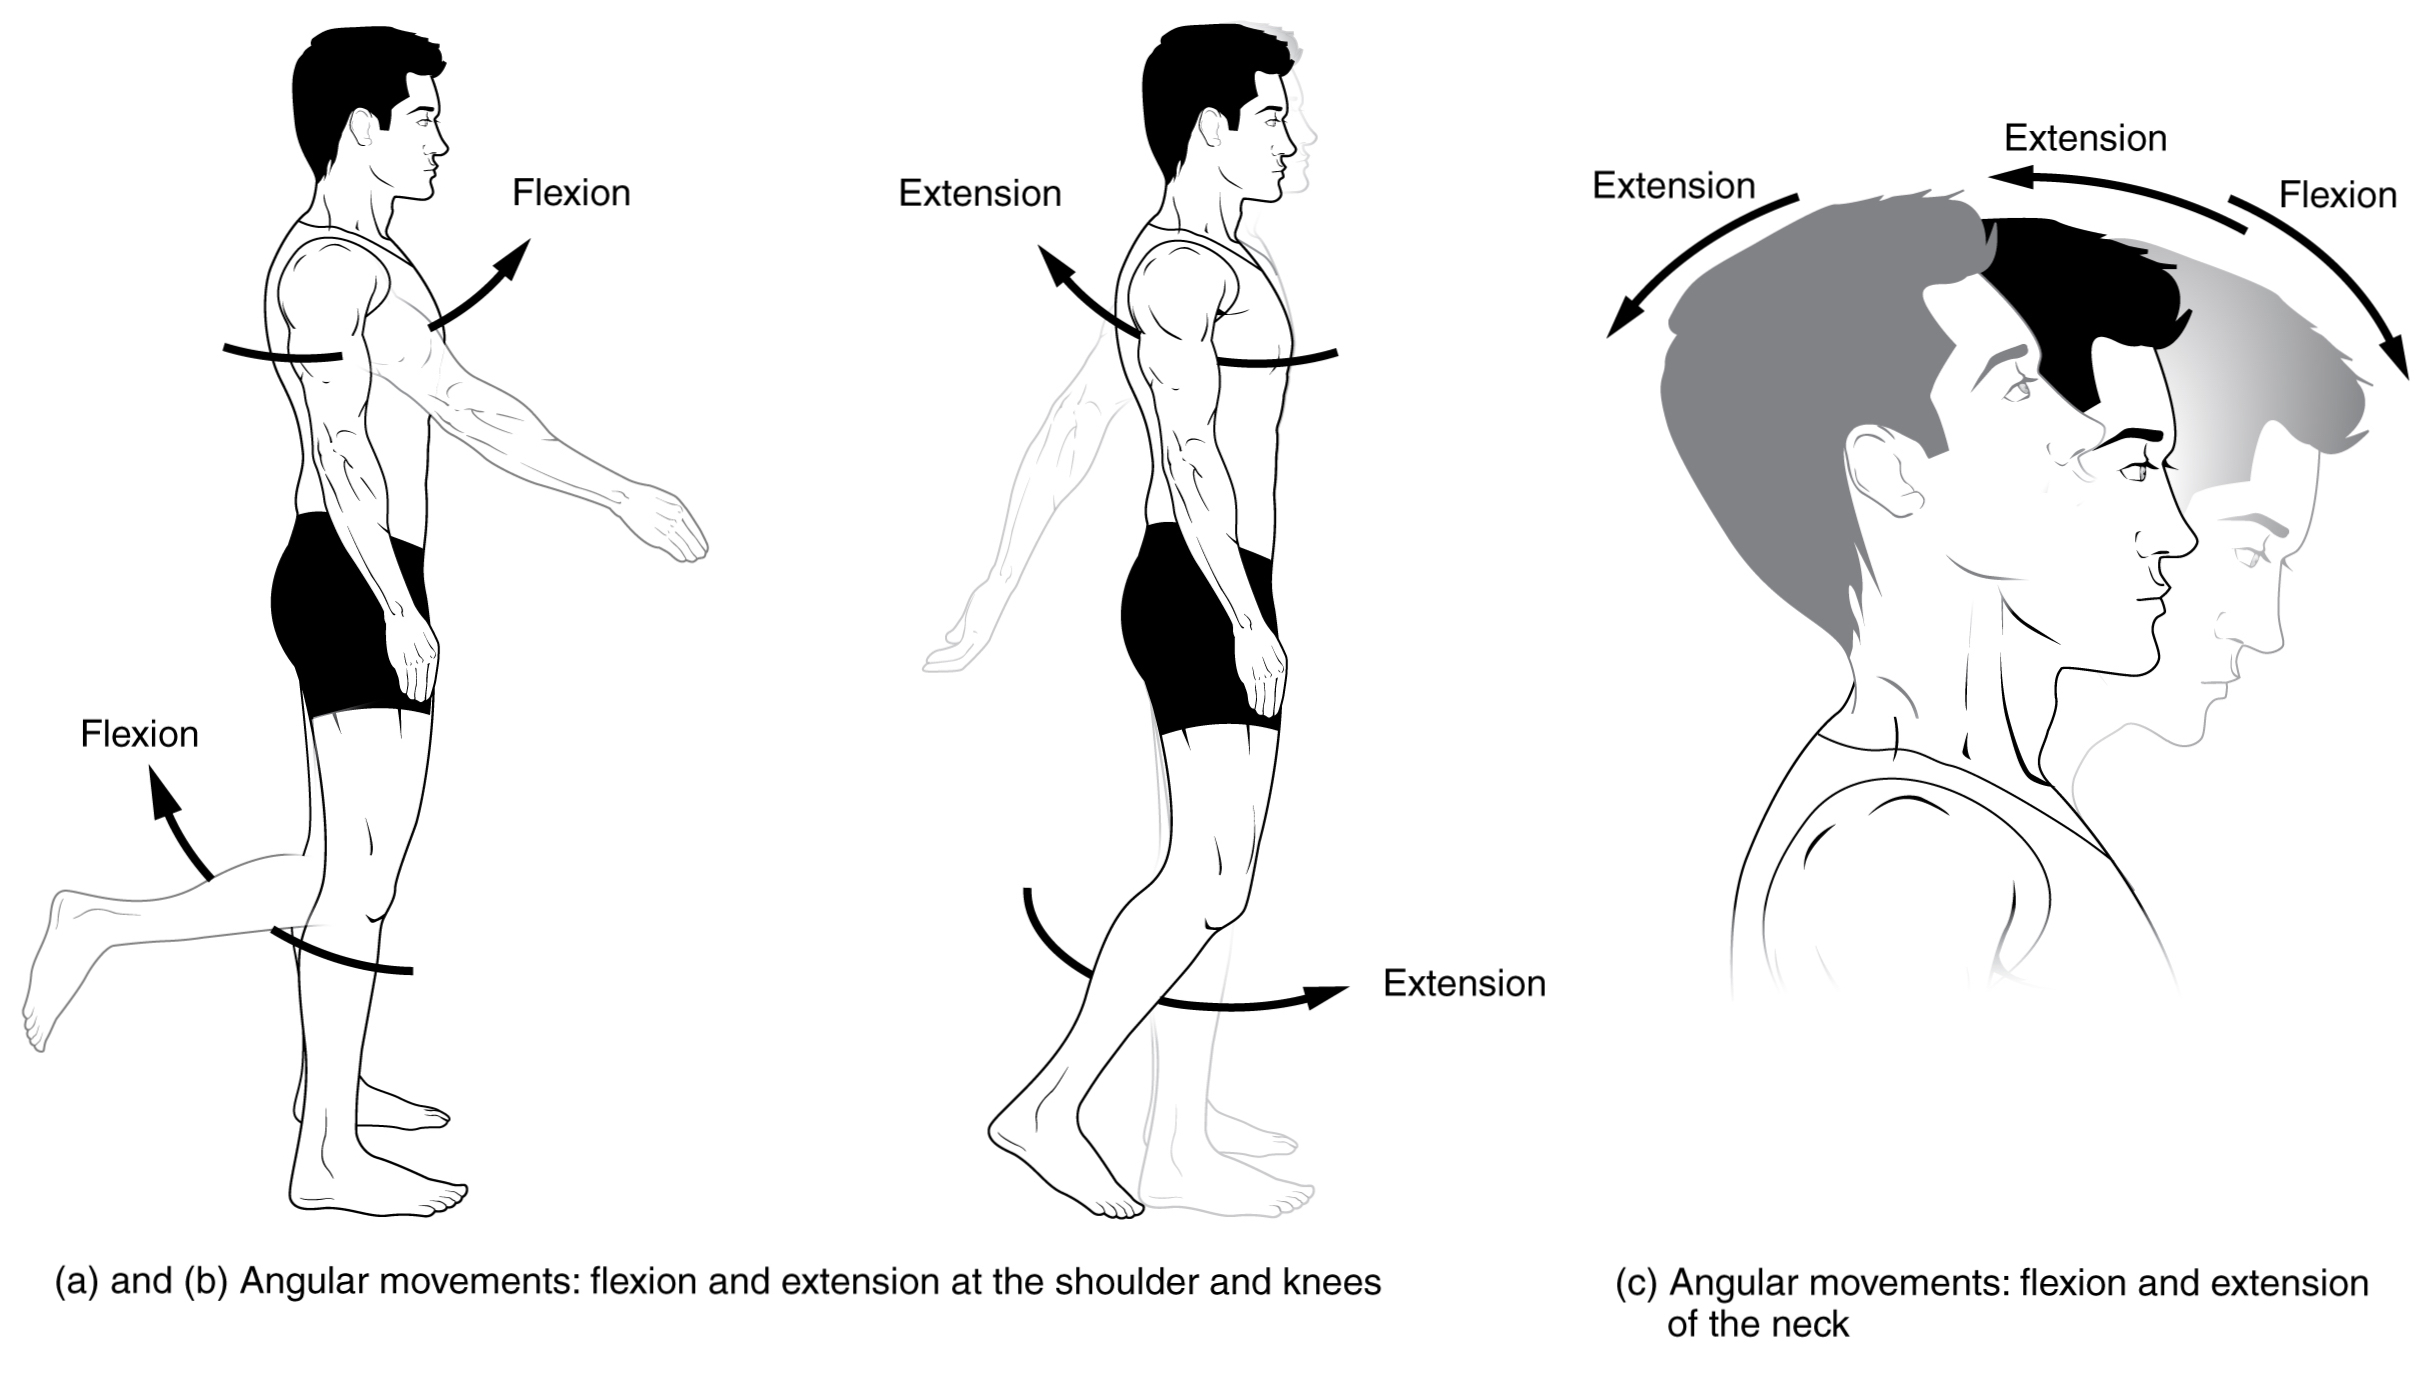 Anatomical Movements of the Human Body